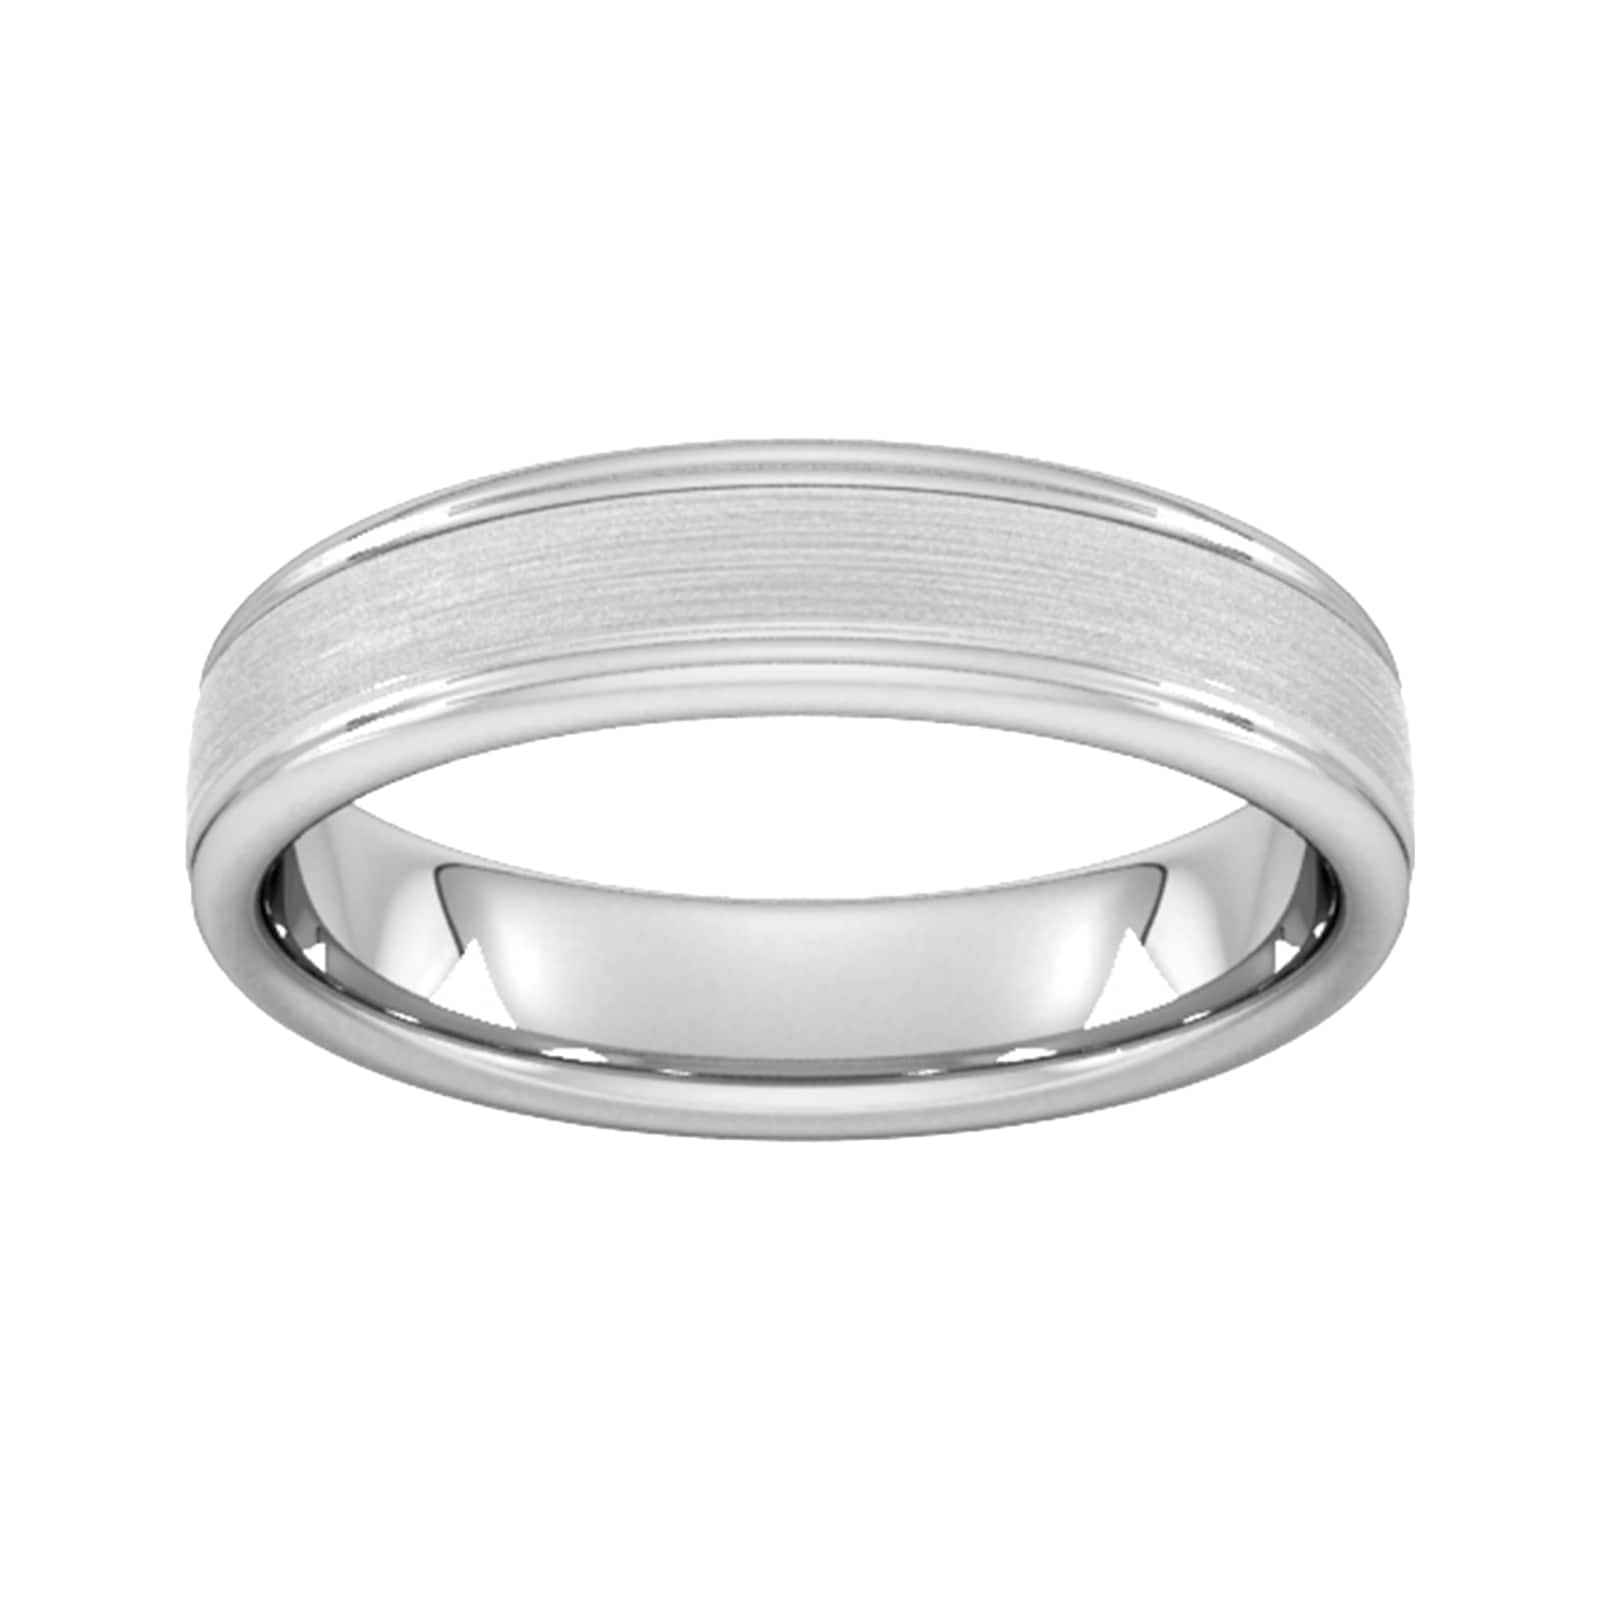 5mm Traditional Court Standard Matt Centre With Grooves Wedding Ring In 950 Palladium - Ring Size L